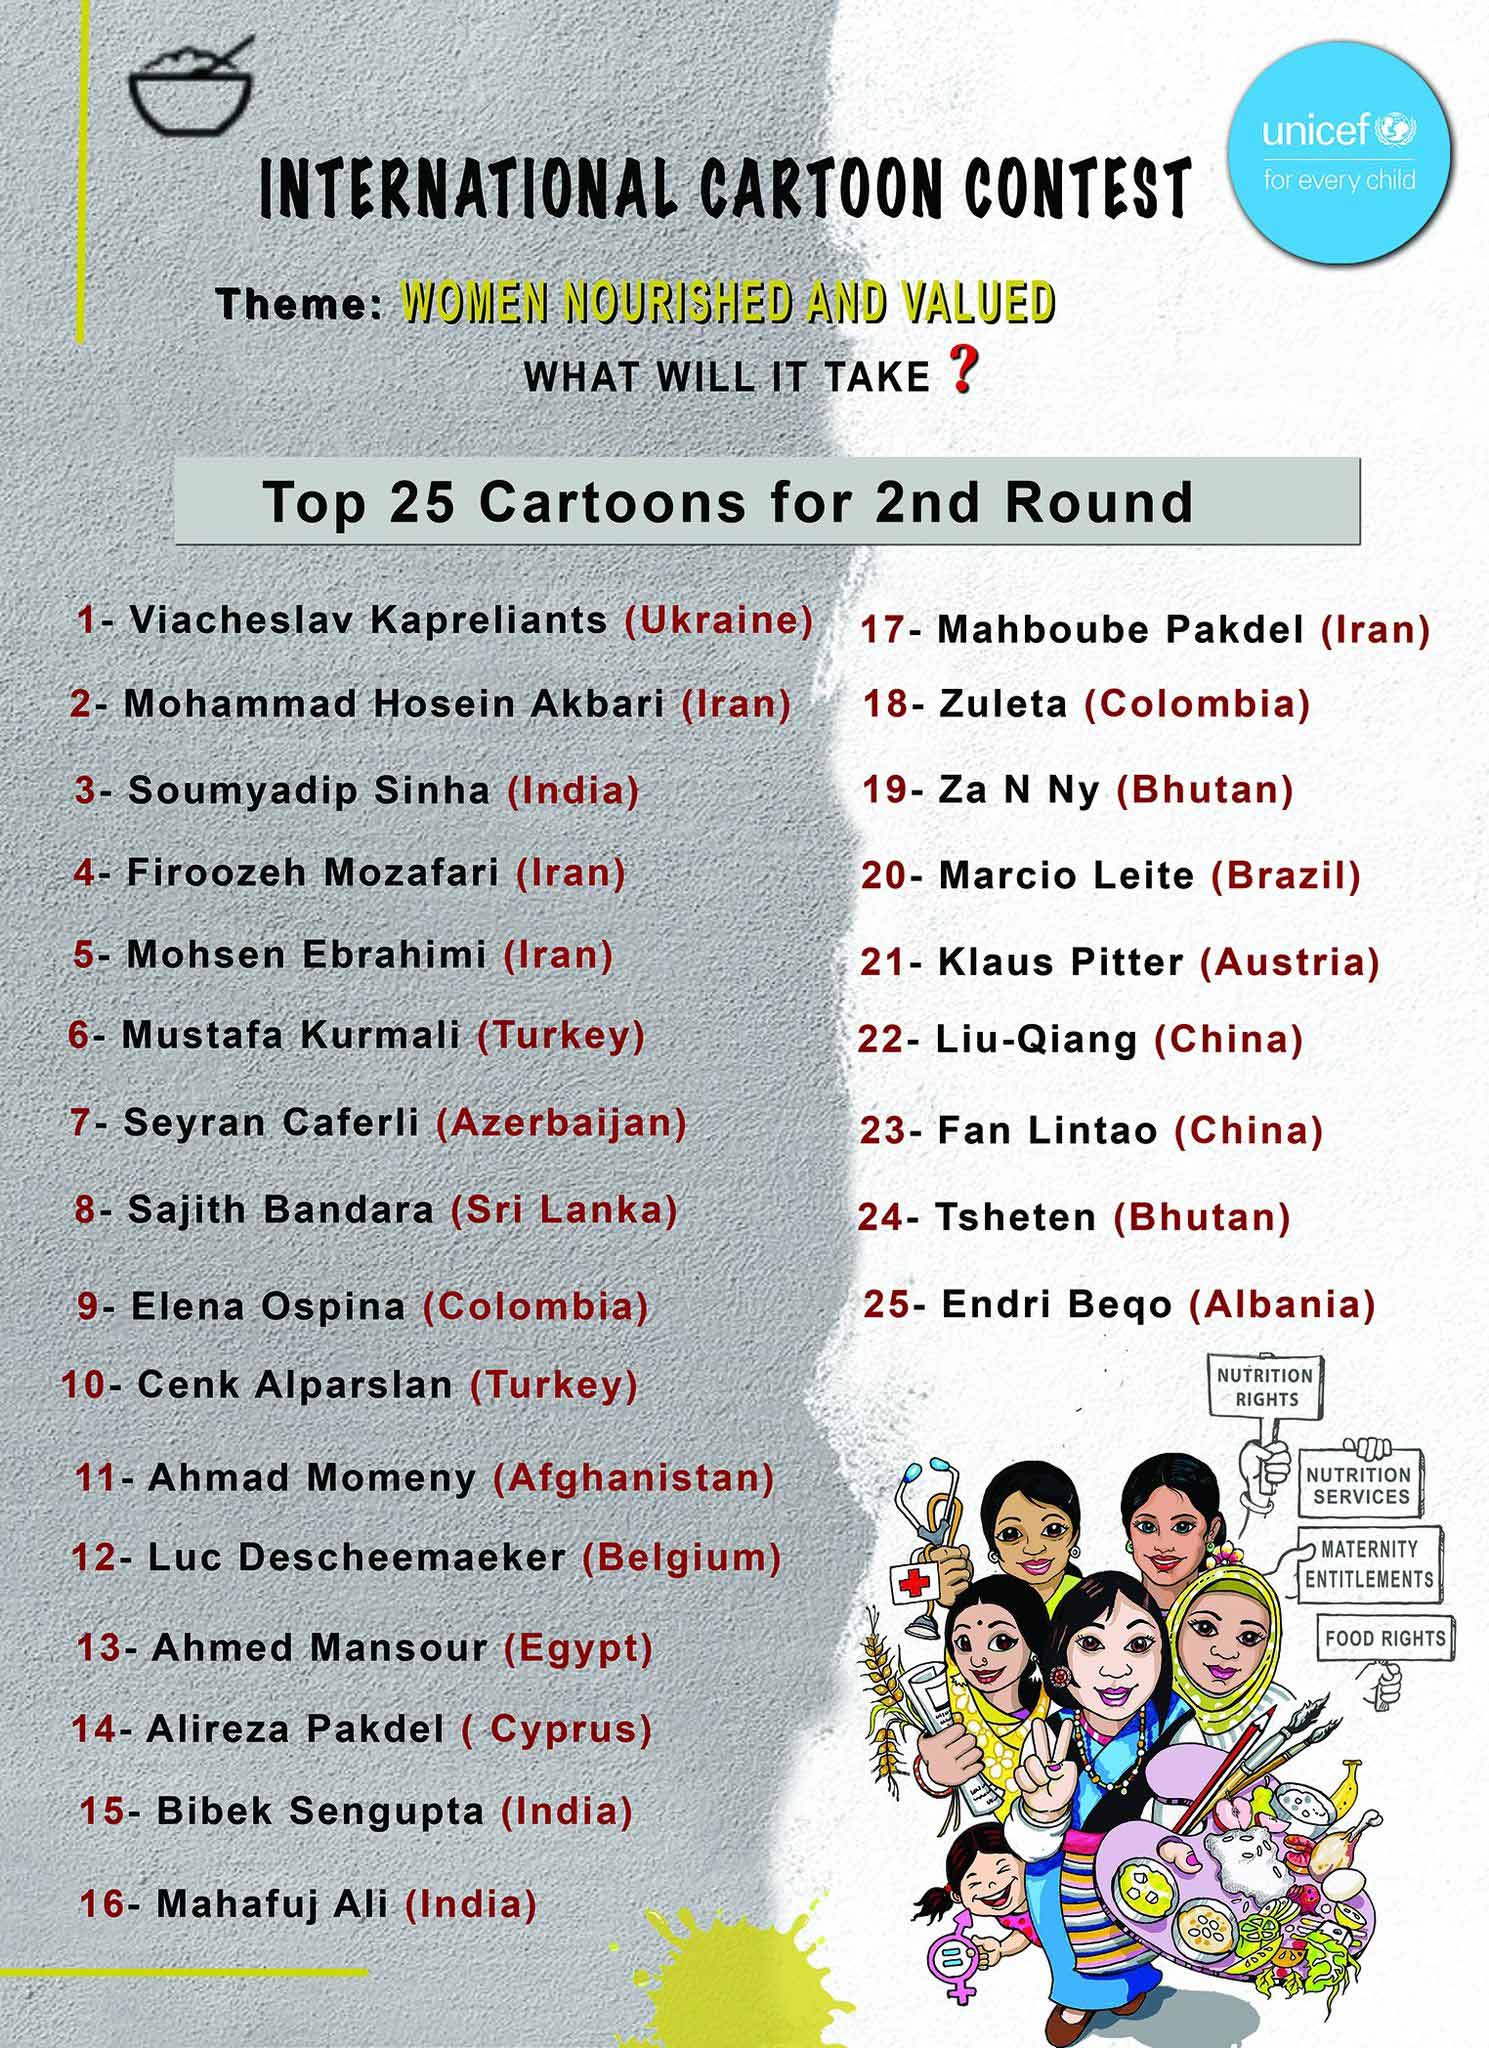 Top 25 Cartoons for 2nd Round of the International Cartoon Contest, Nepal